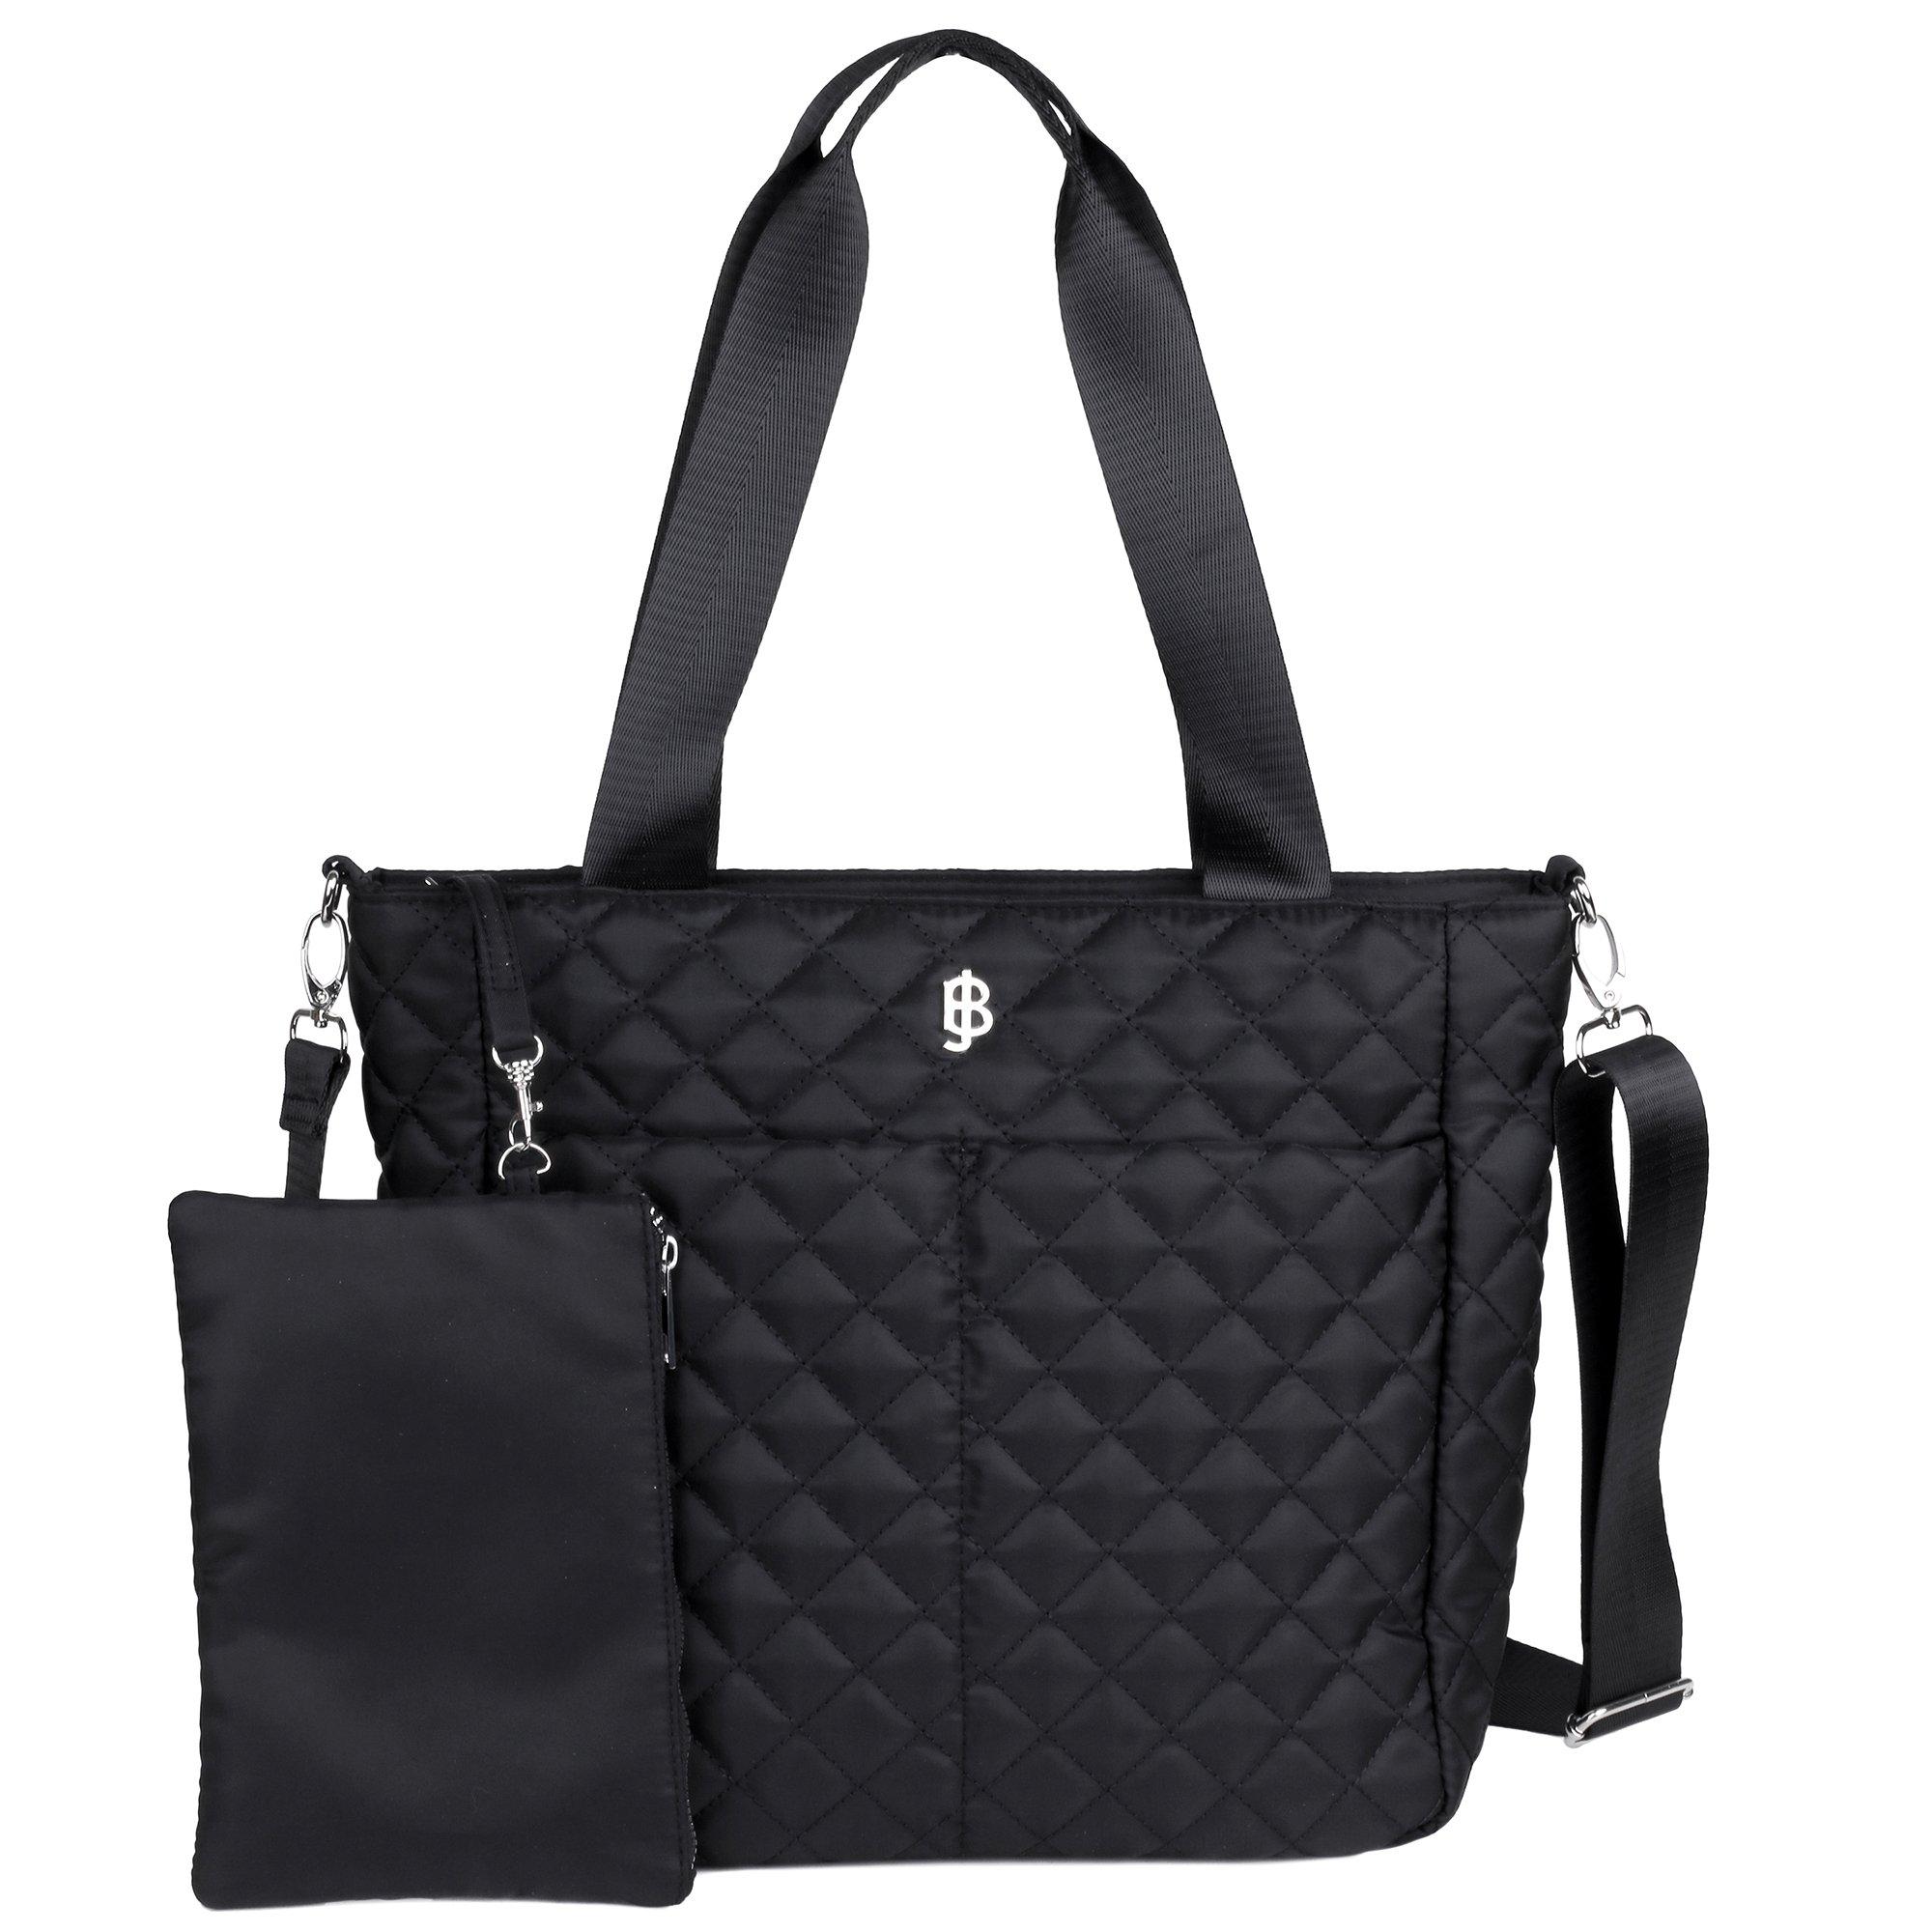 Quilted Nylon Organizer Tote